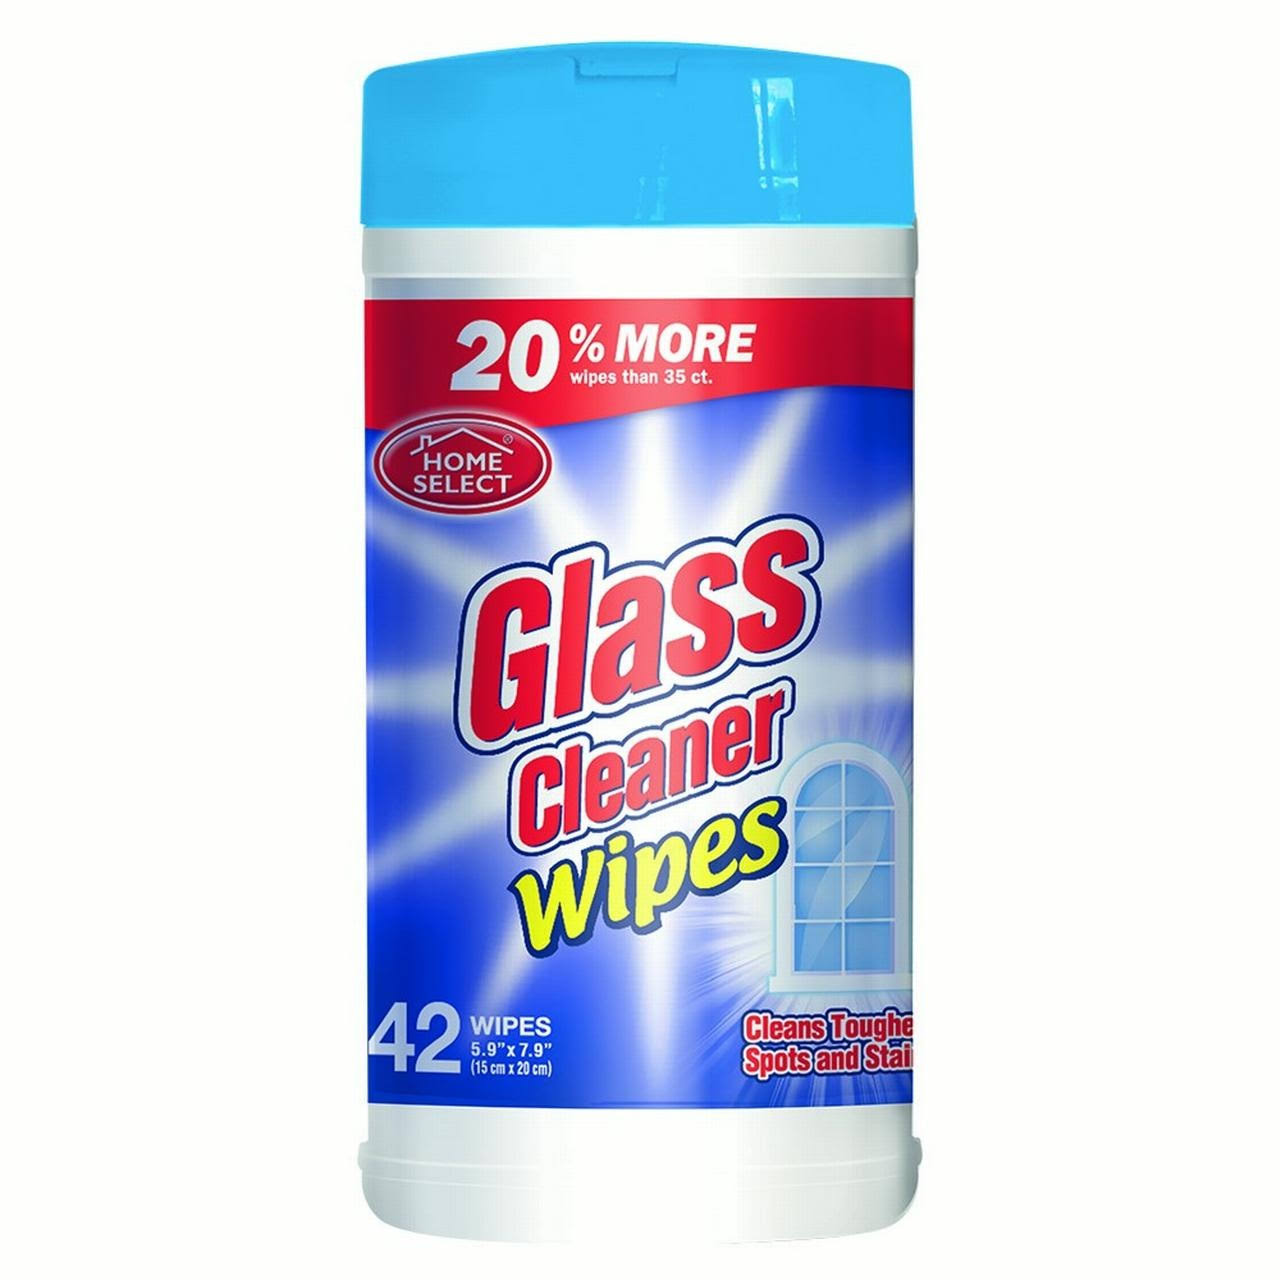 Home Select Glass Cleaner Wipes - 35ct